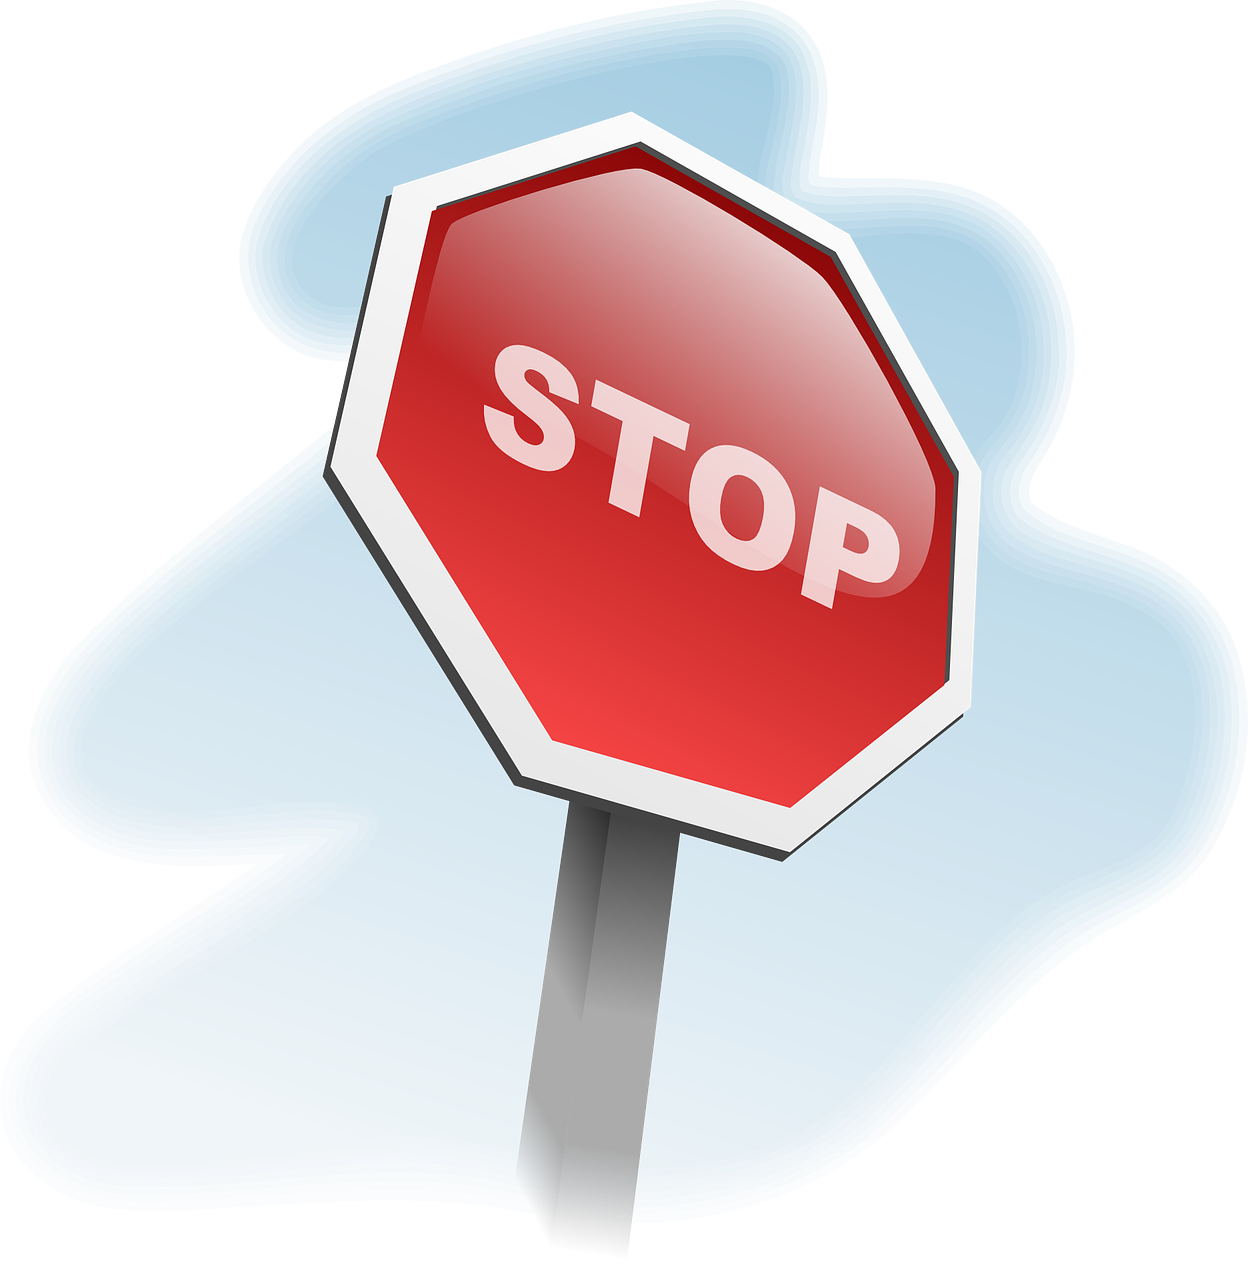 Znak Stop stop-sign-37020_1280 Image by Clker-Free-Vector-Images from Pixabay